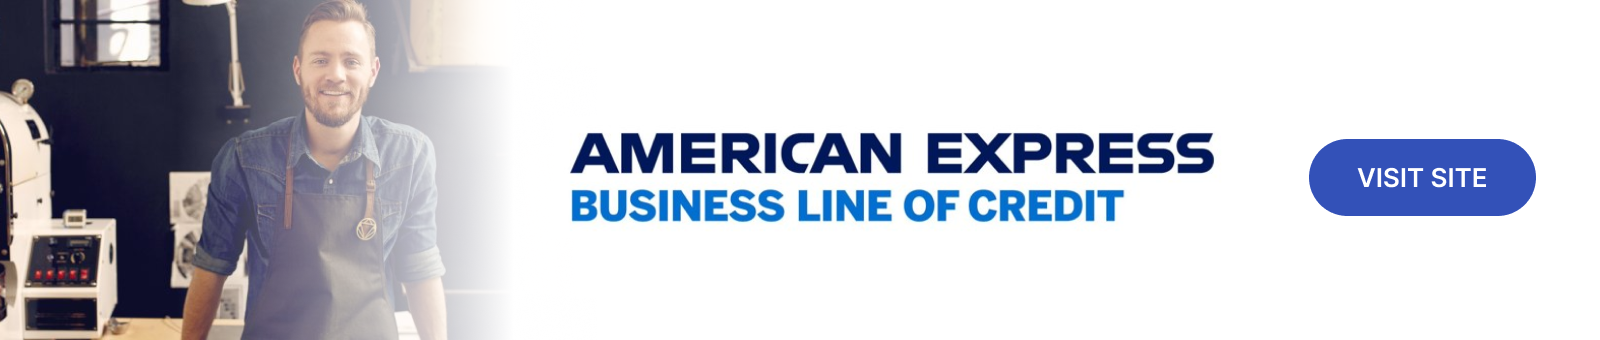 American Express Small Business Loans